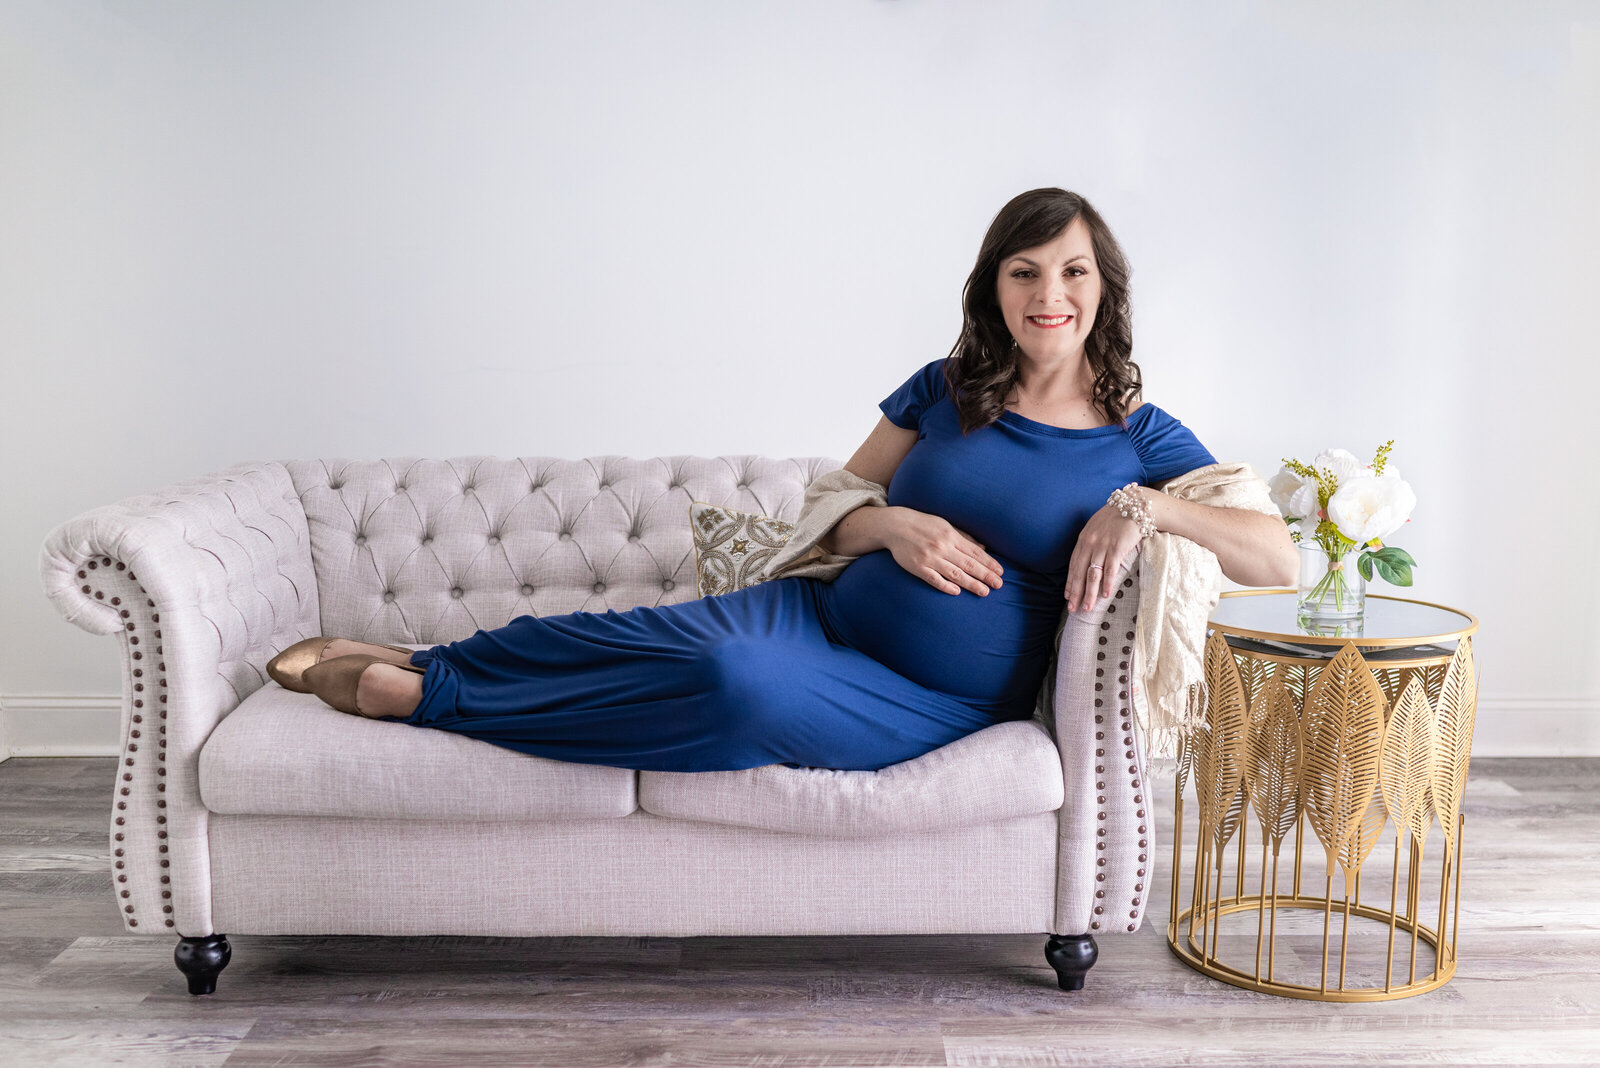 A pregnant woman lays across the sofa and poses for her maternity portraits in the studio